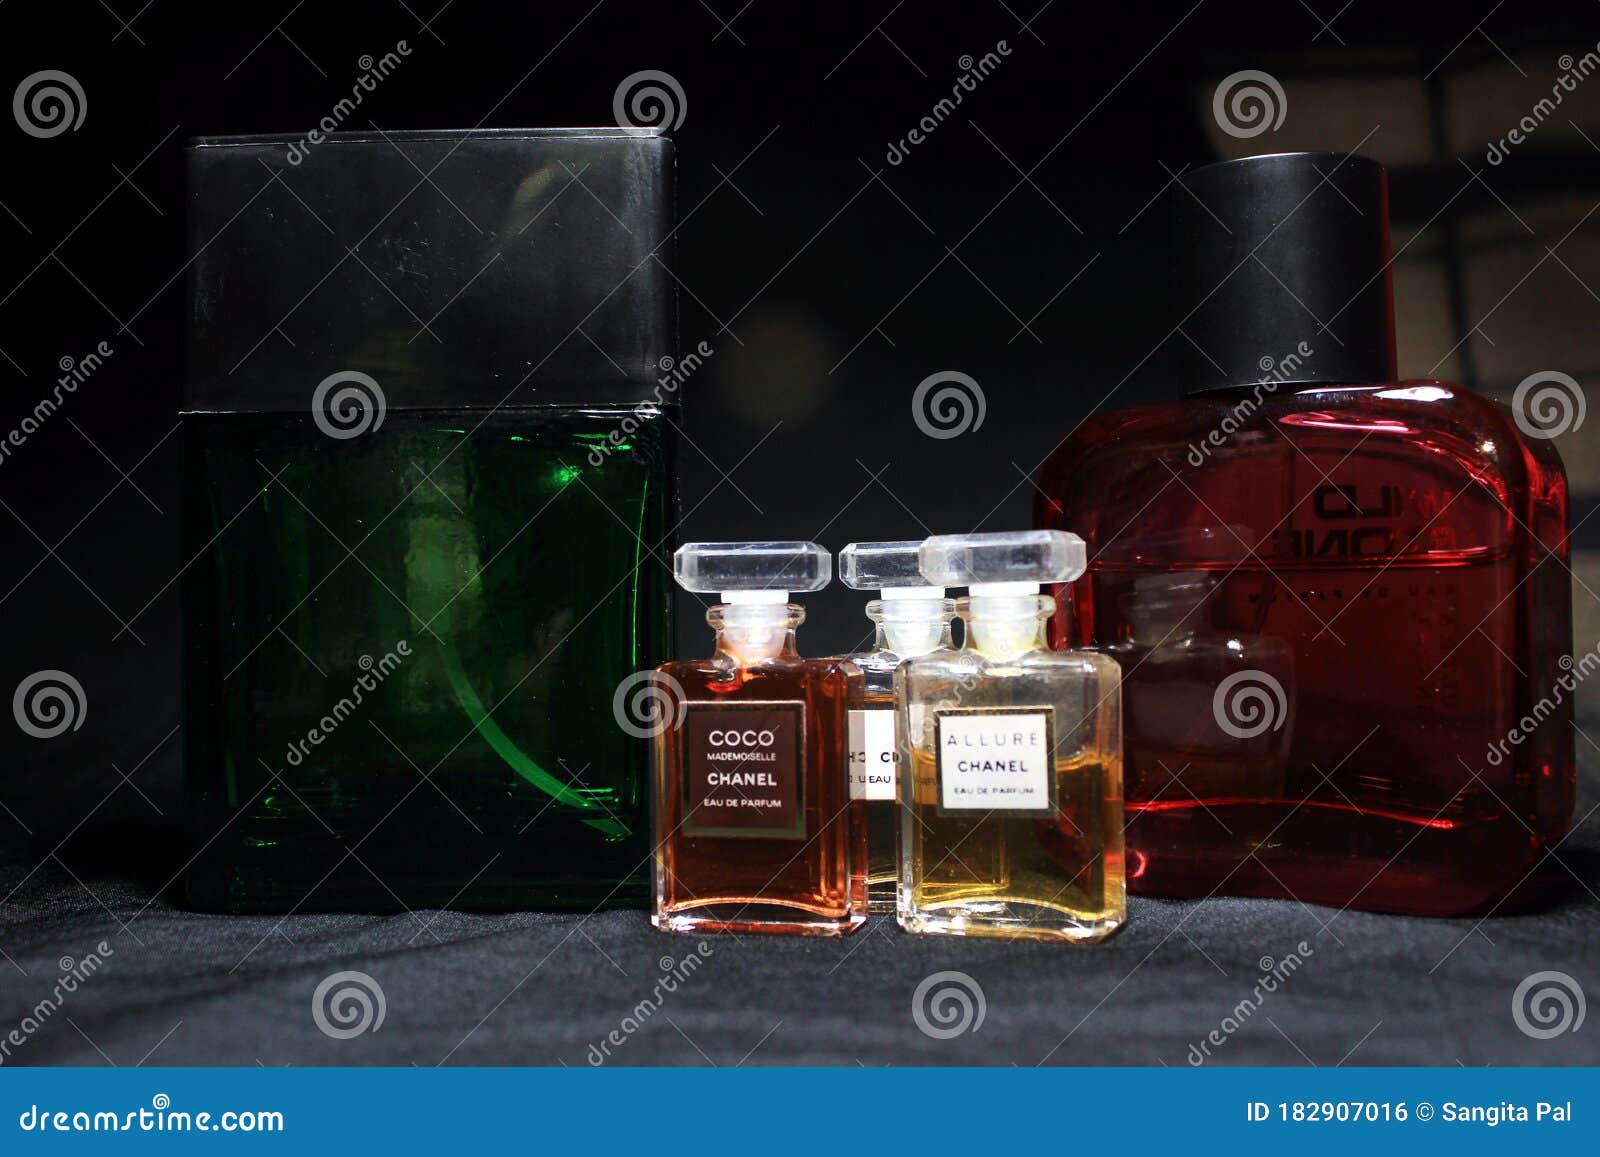 Chanel Perfume & Wild Stone Bottles Isolated on Black Background. Bottle  with Coco Chanel & N`5 Chanel Perfume Product Editorial Photo - Image of  famous, closeup: 182907946